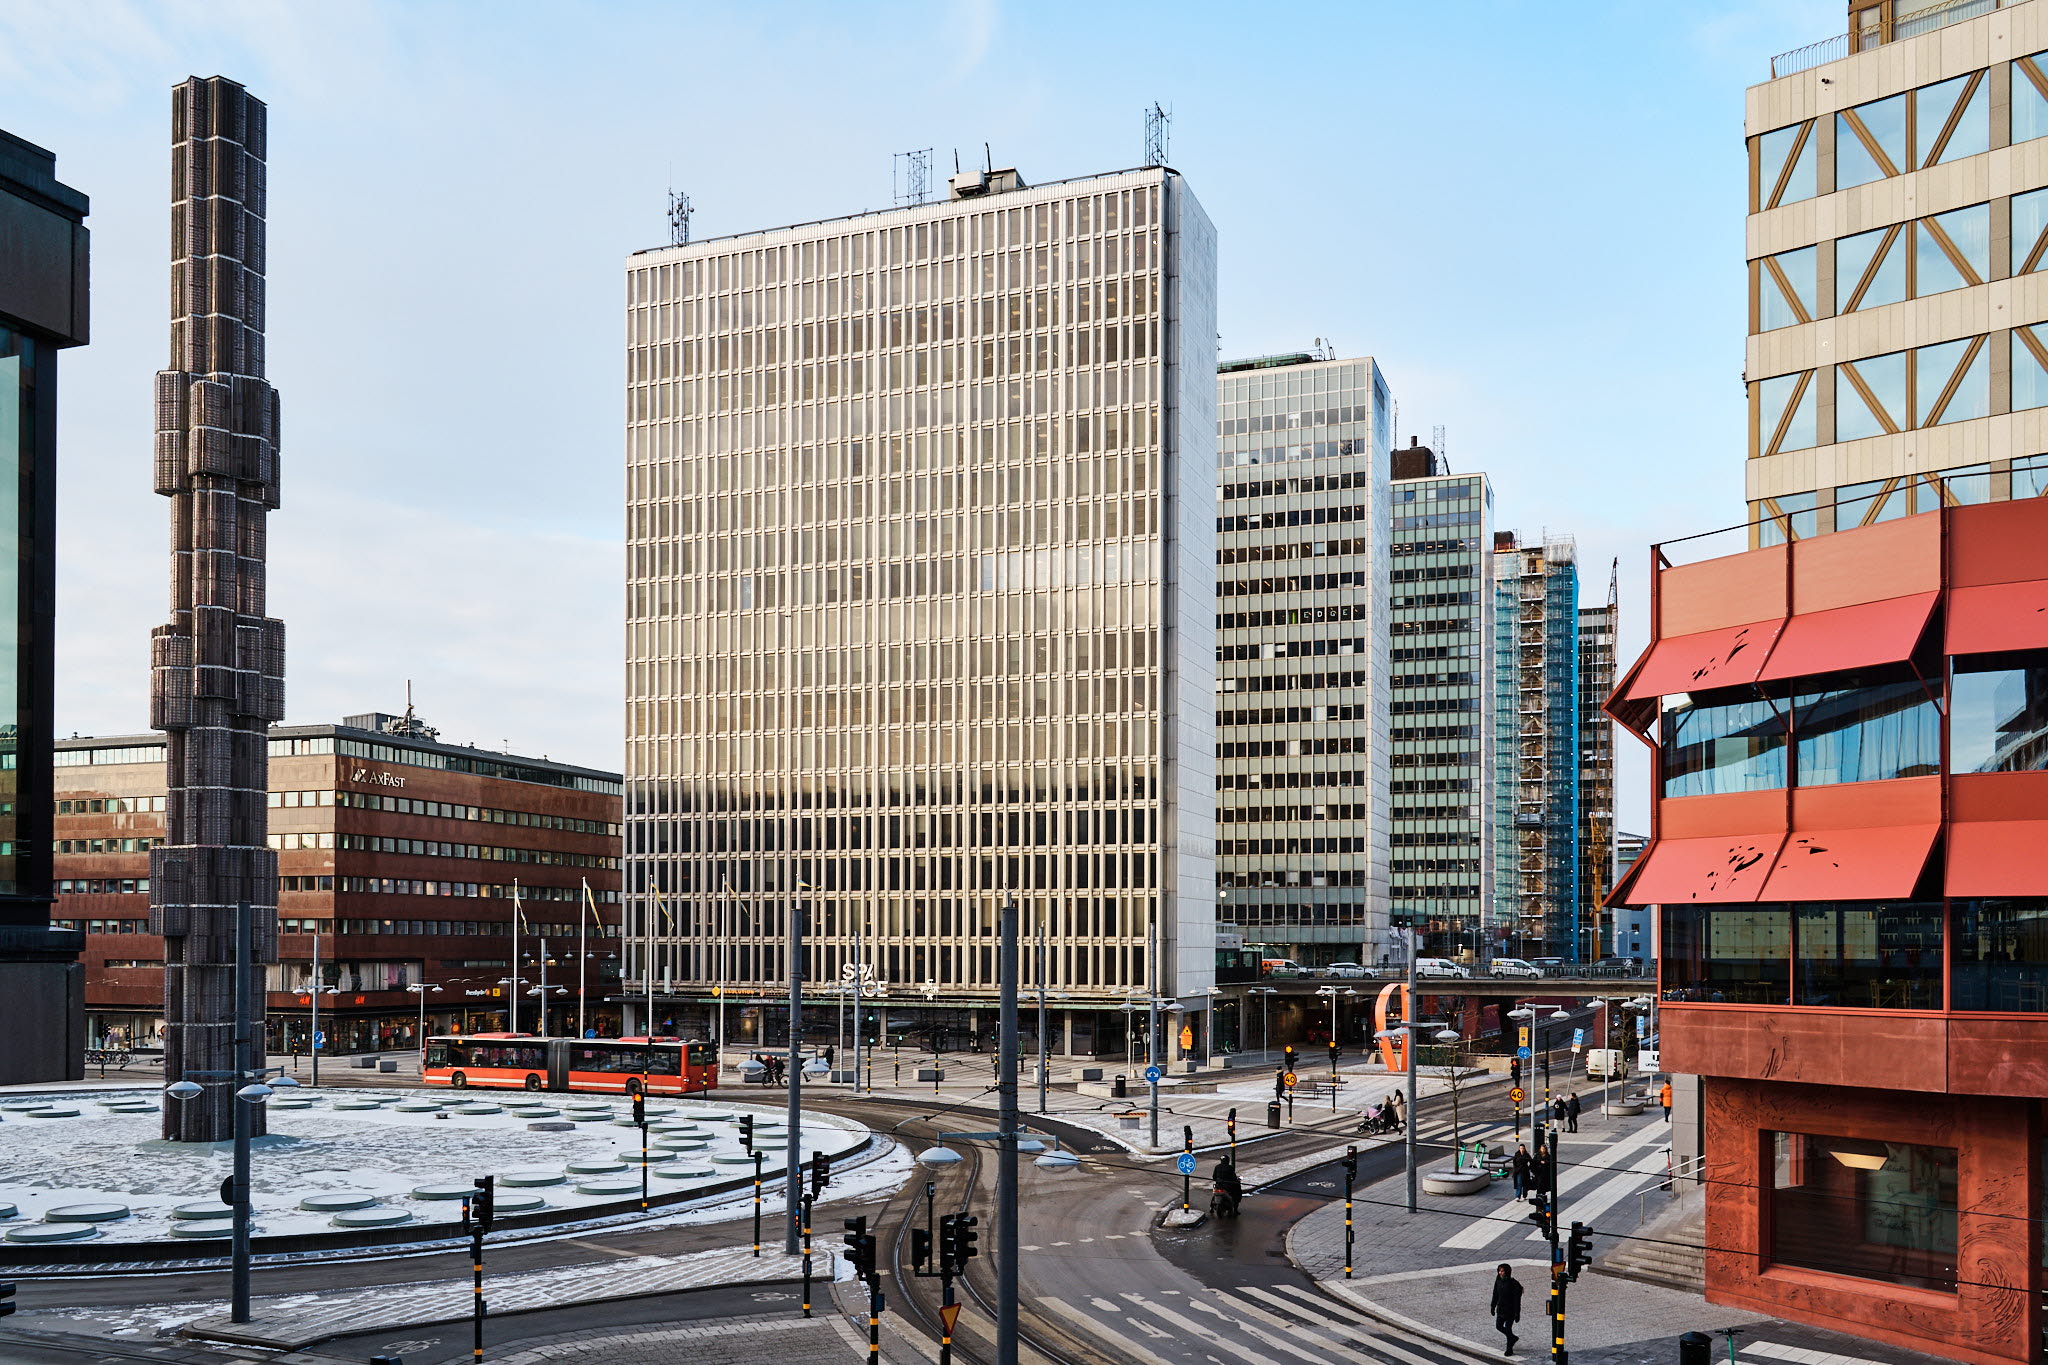 Cityscape of the Hötorg buildings at Sergels Torg